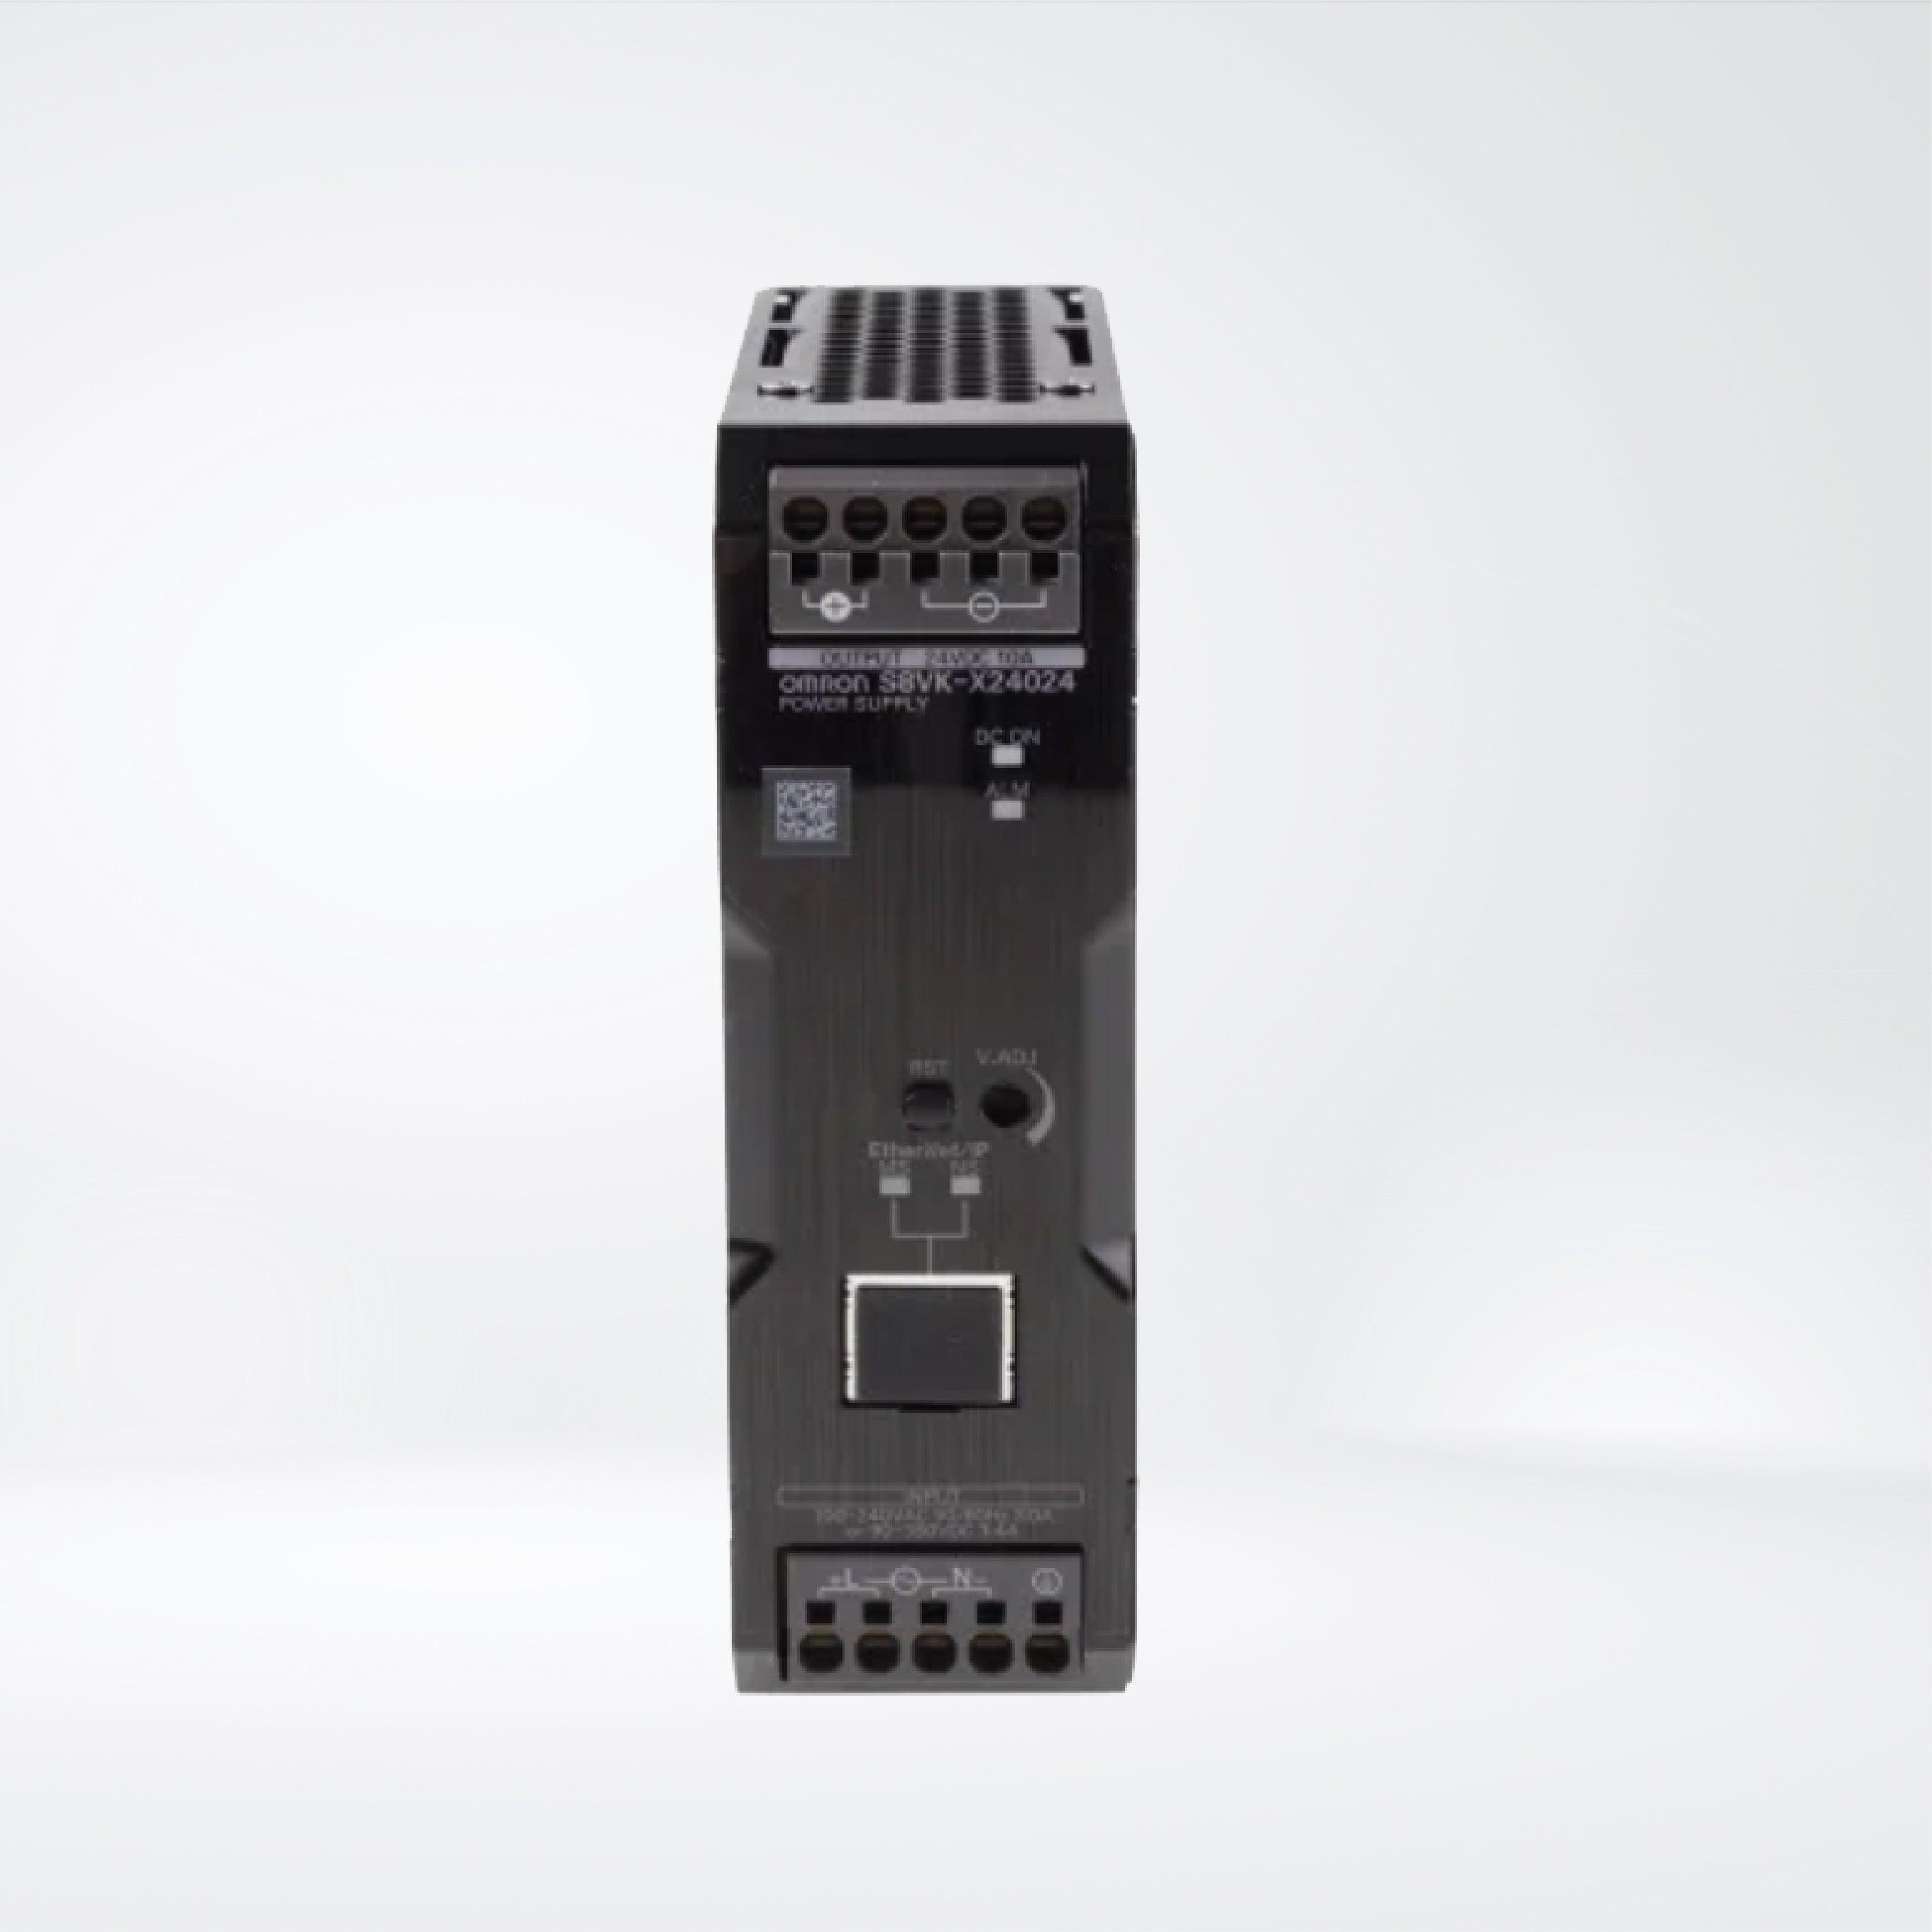 S8VK-X24024-EIP Switch Mode Power Supply, with EtherNet/IP, Modbus TCP,240 W, 24 VDC - Riverplus